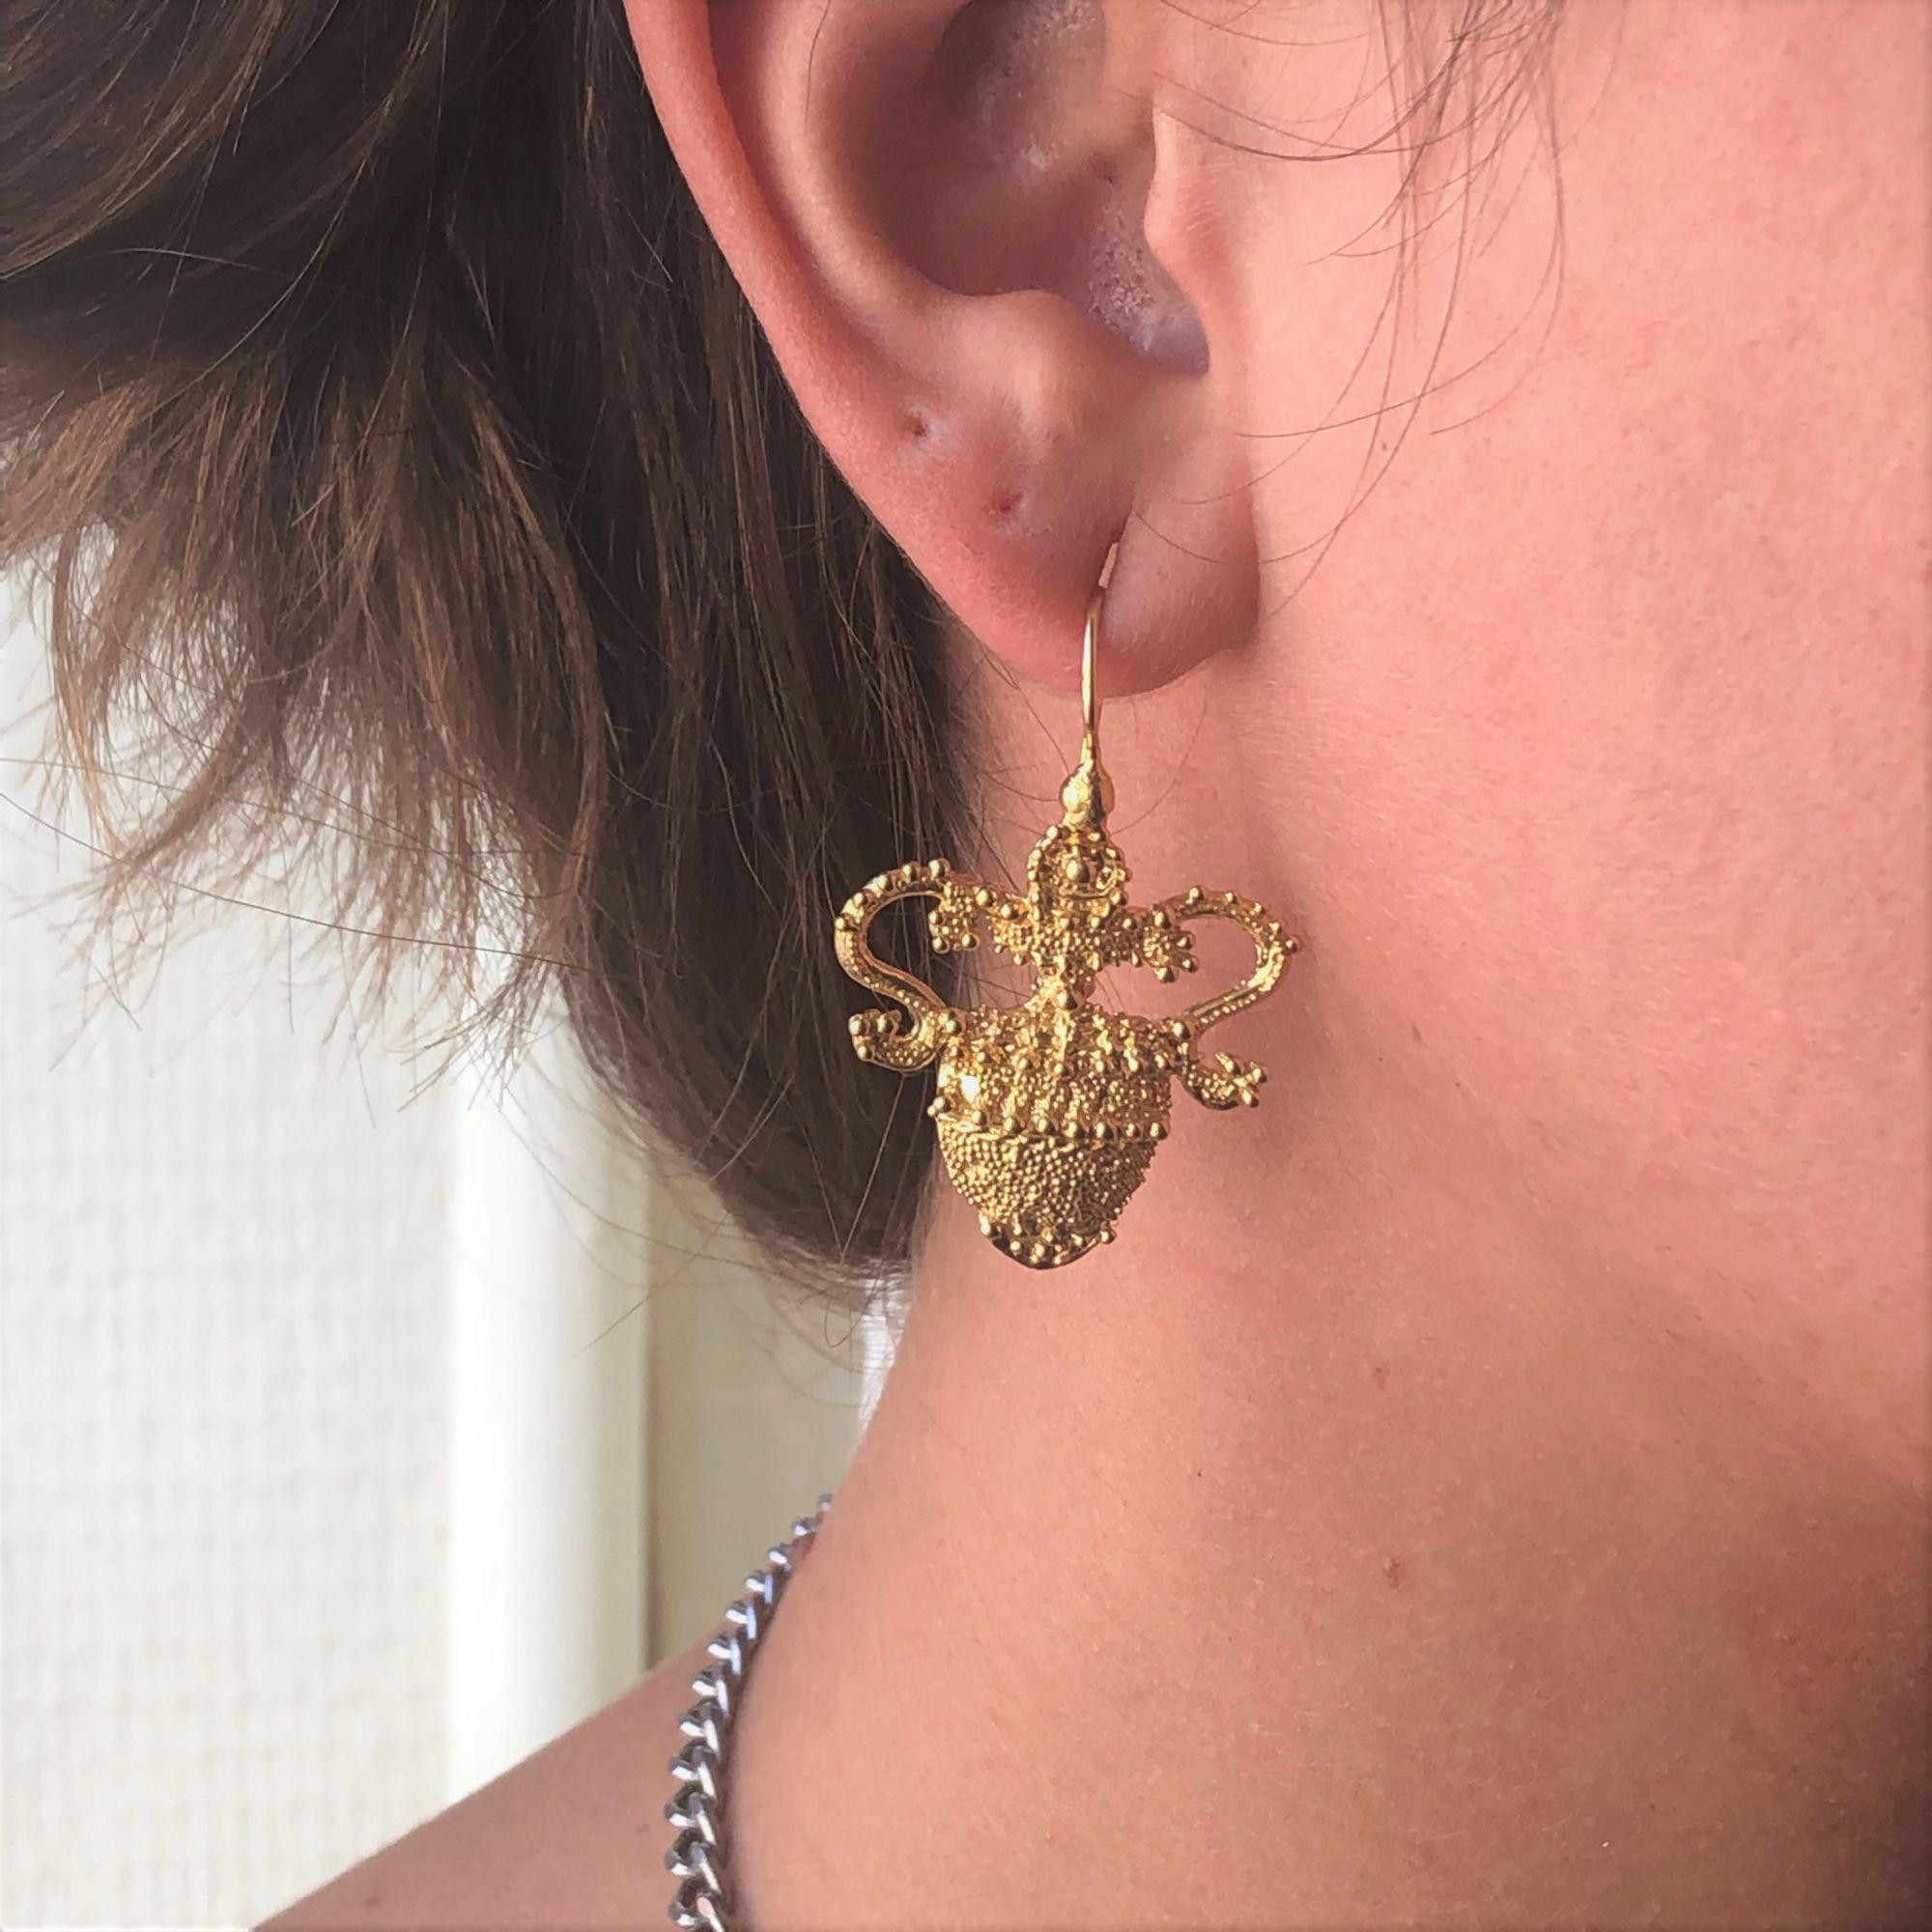 For pierced ears.
Pair of vermeil, silver and yellow gold earrings.
Each vermeil earring features a textured amphora. The attachment system is a gooseneck with safety hook.
Height : 4 cm, width : 2.7 cm.
Total weight : about 10 g.
New earrings from